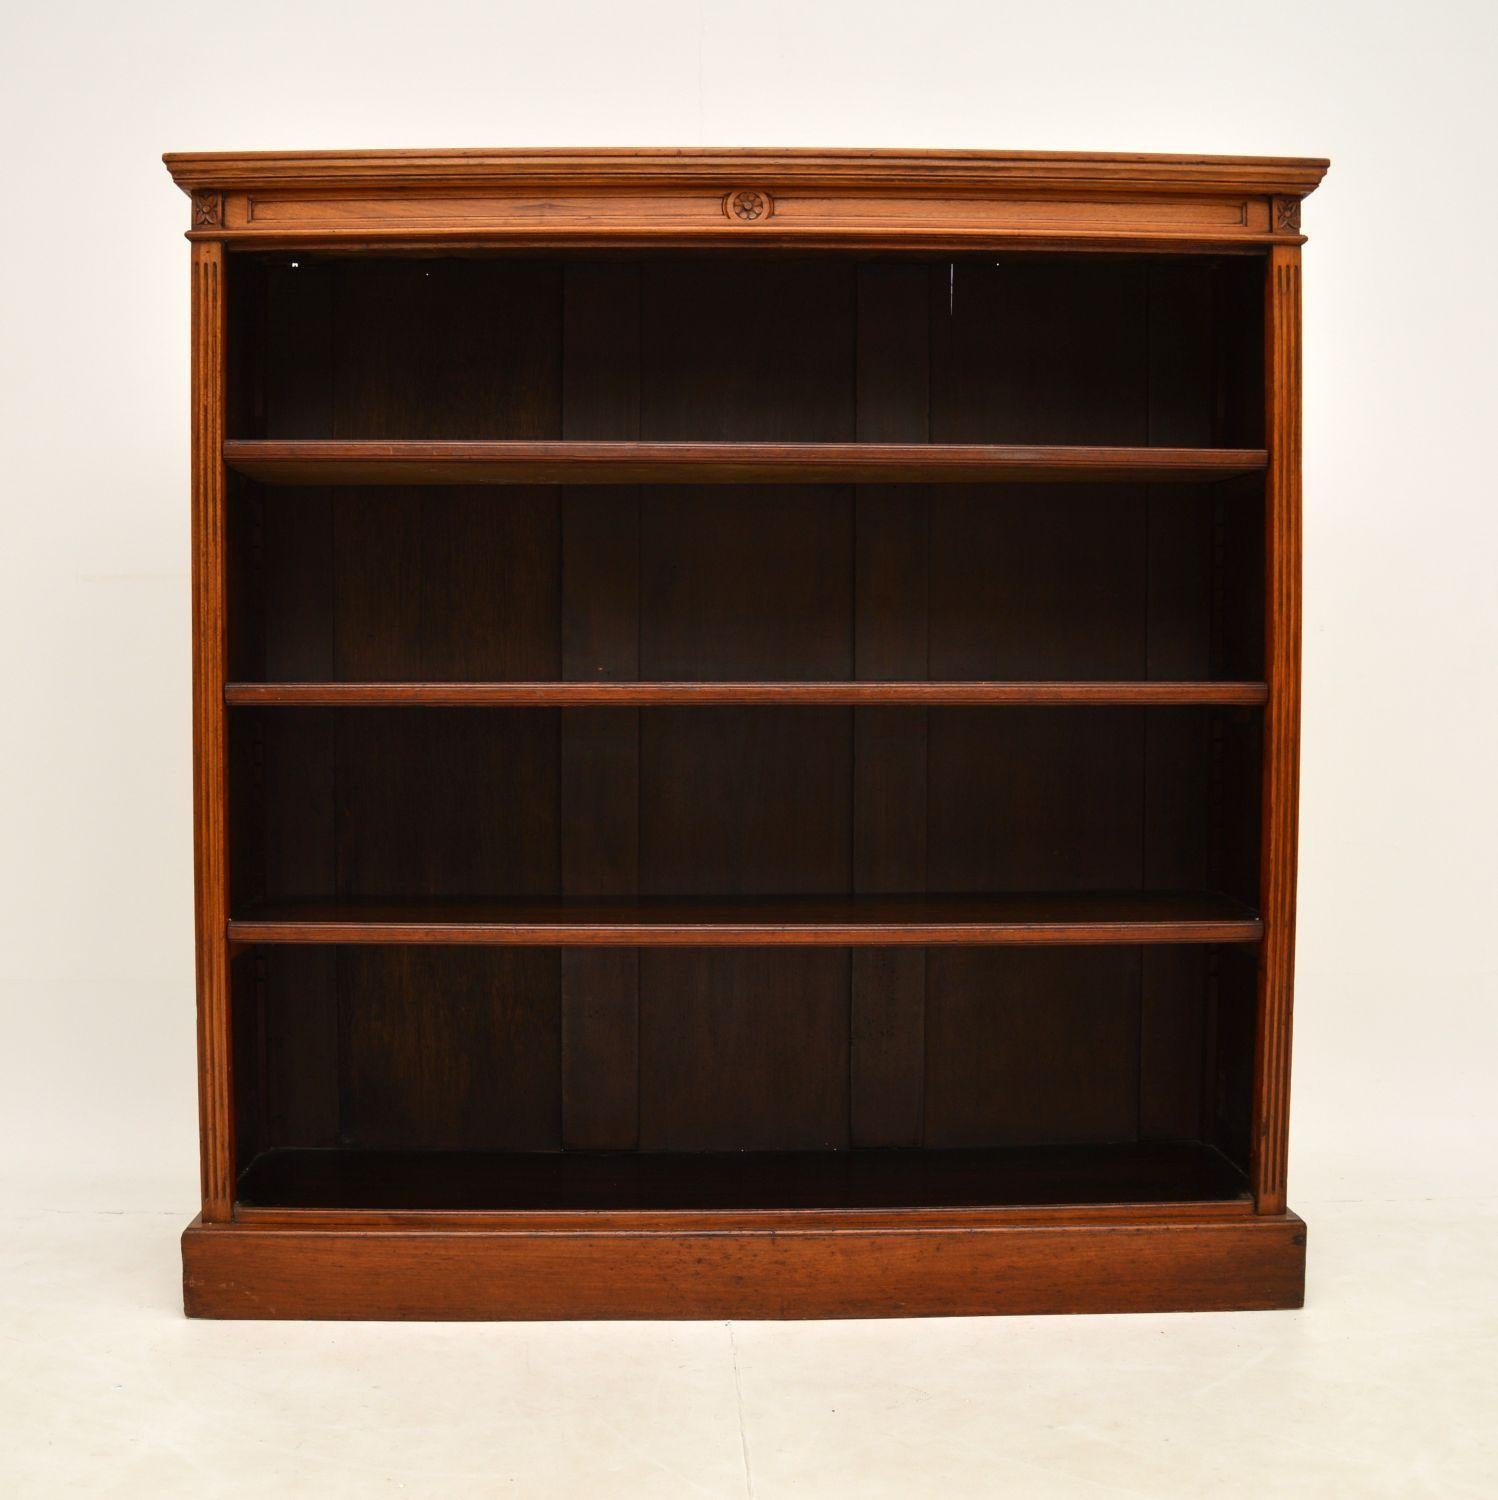 A beautiful and useful Victorian open bookcase in solid walnut, made in England & dating from around the 1860-1880 period.

It is of fine quality, with lovely floral carving on the corners, the front edges are reeded and this sits on a plinth